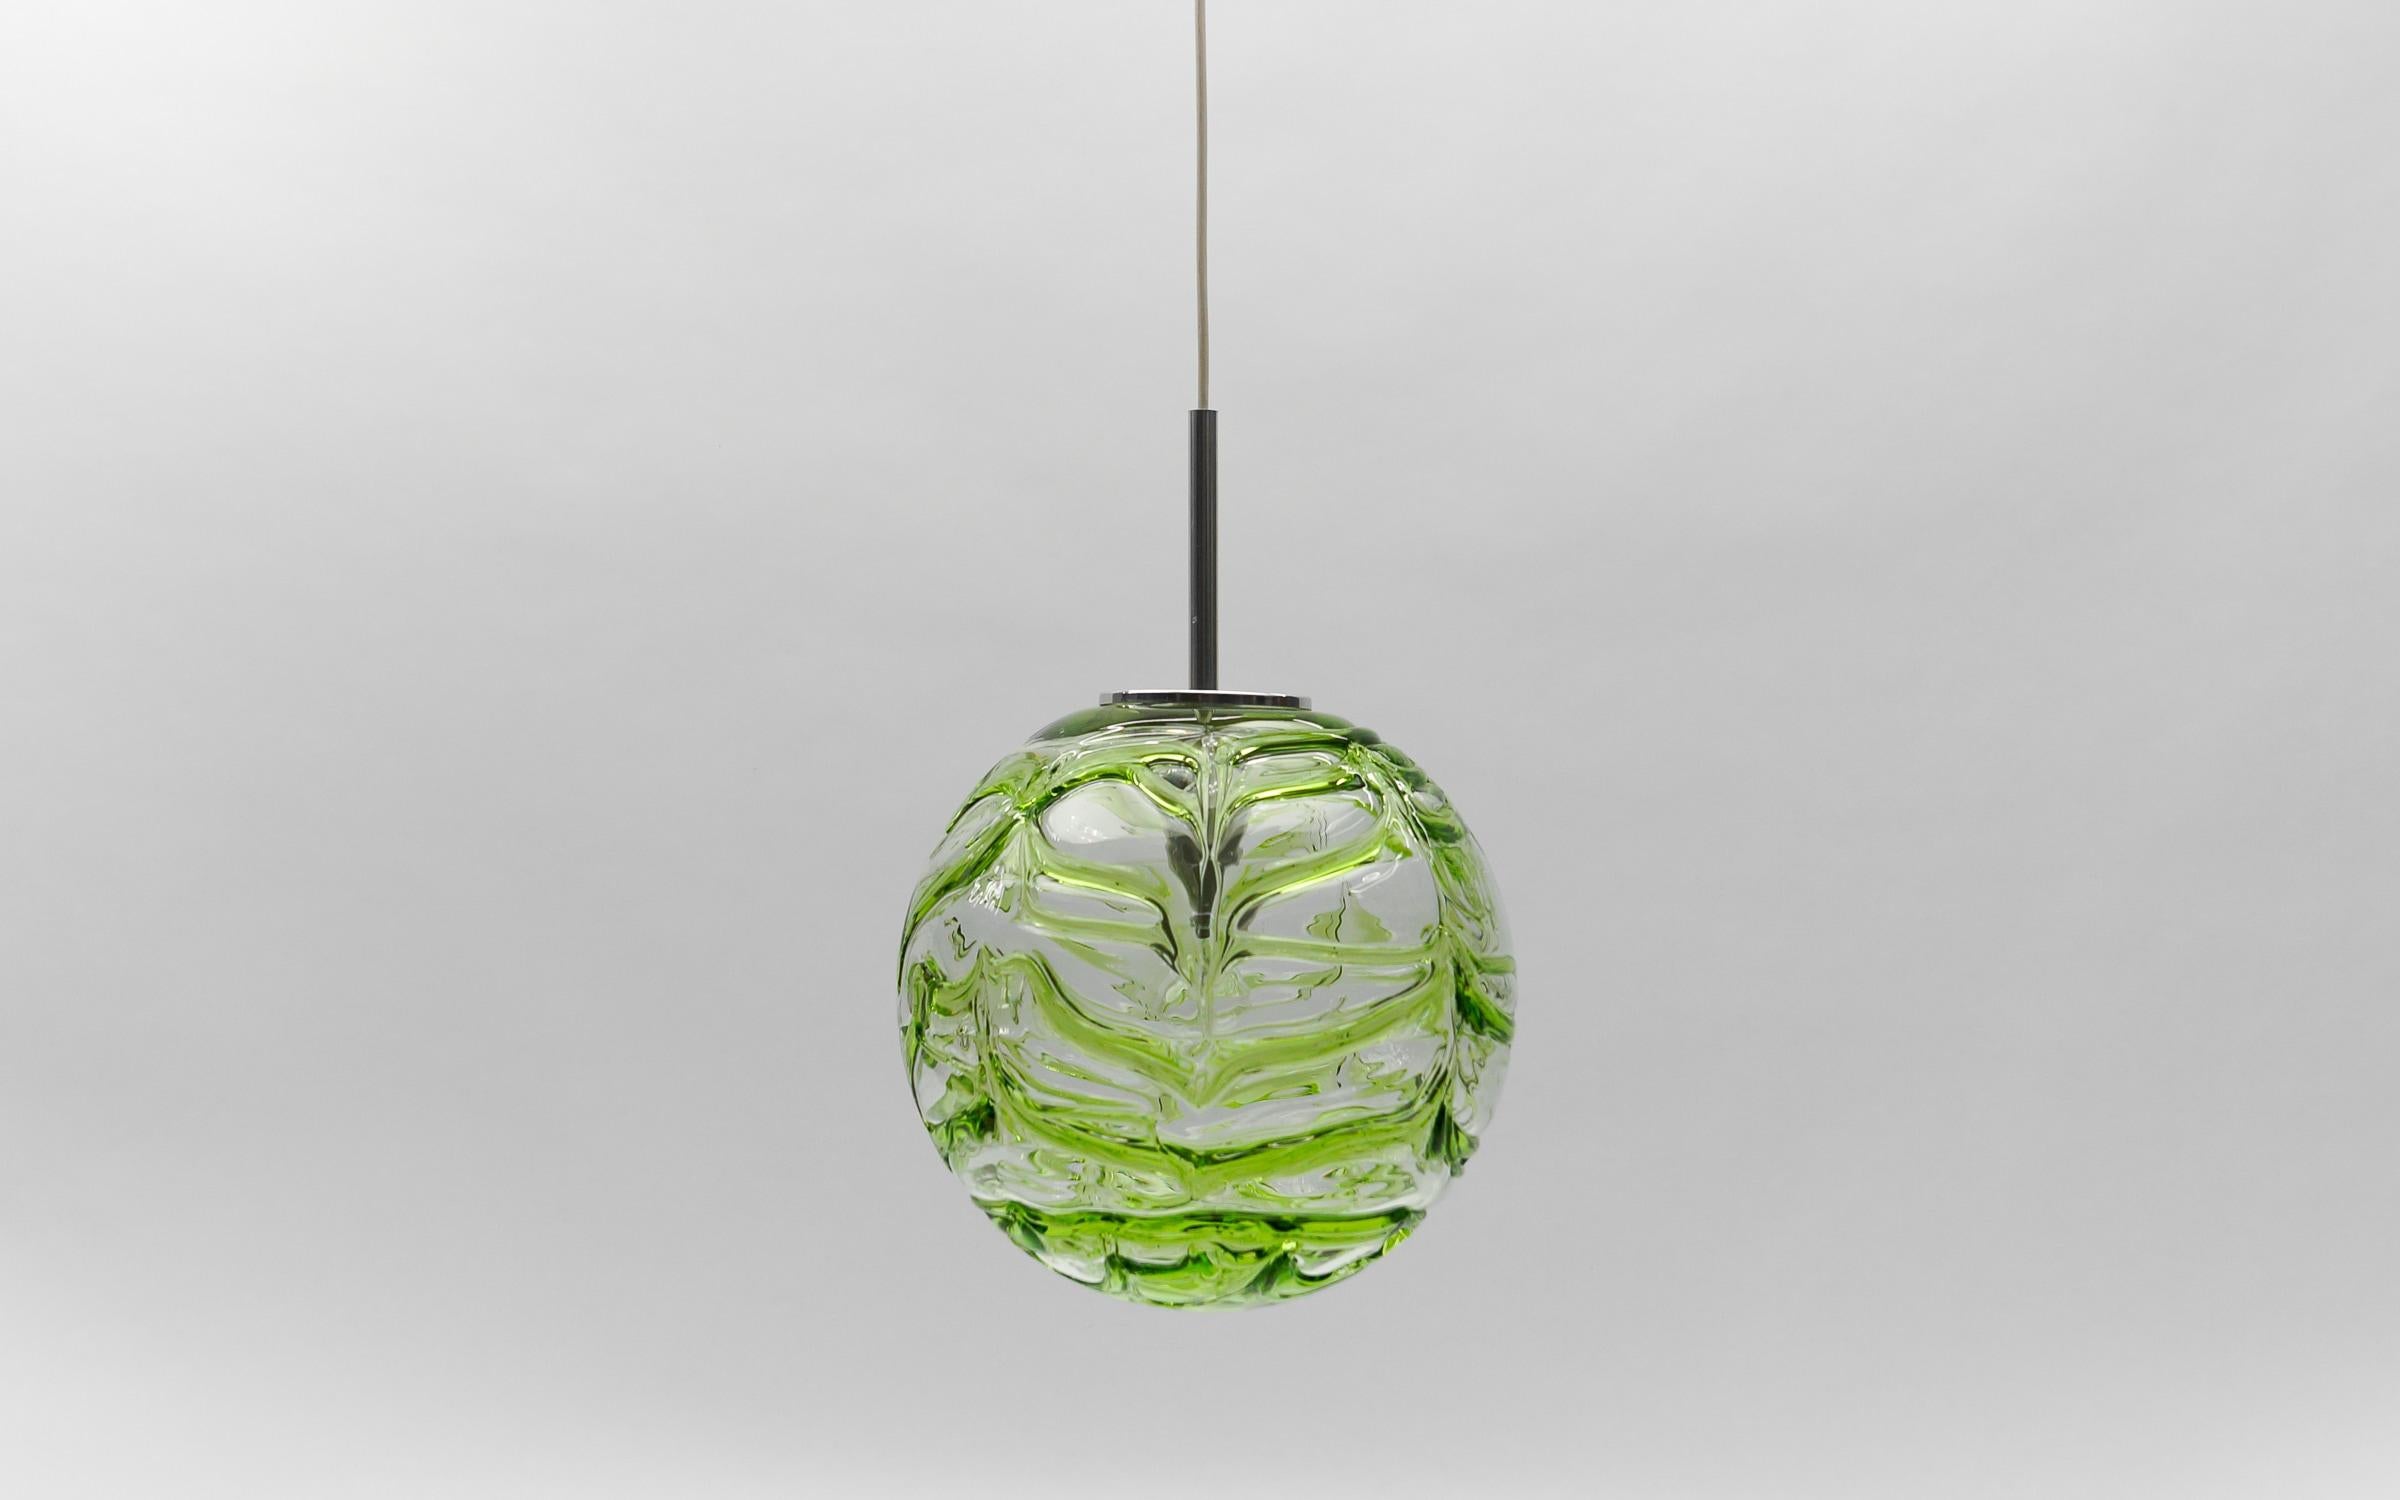 Large Green Murano Glass Ball Pendant Lamp by Doria, - 1960s Germany For Sale 8